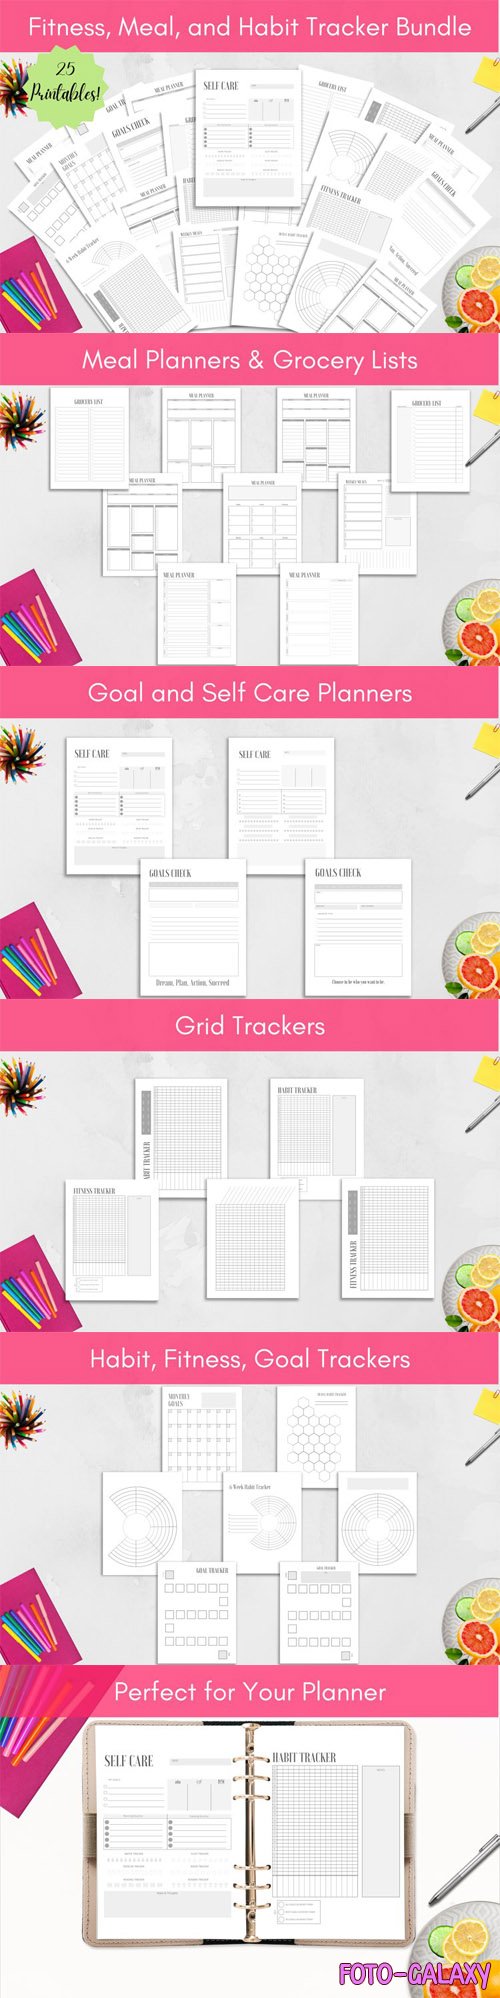 Fitness, Meal, and Habit Tracker Planner Bundle